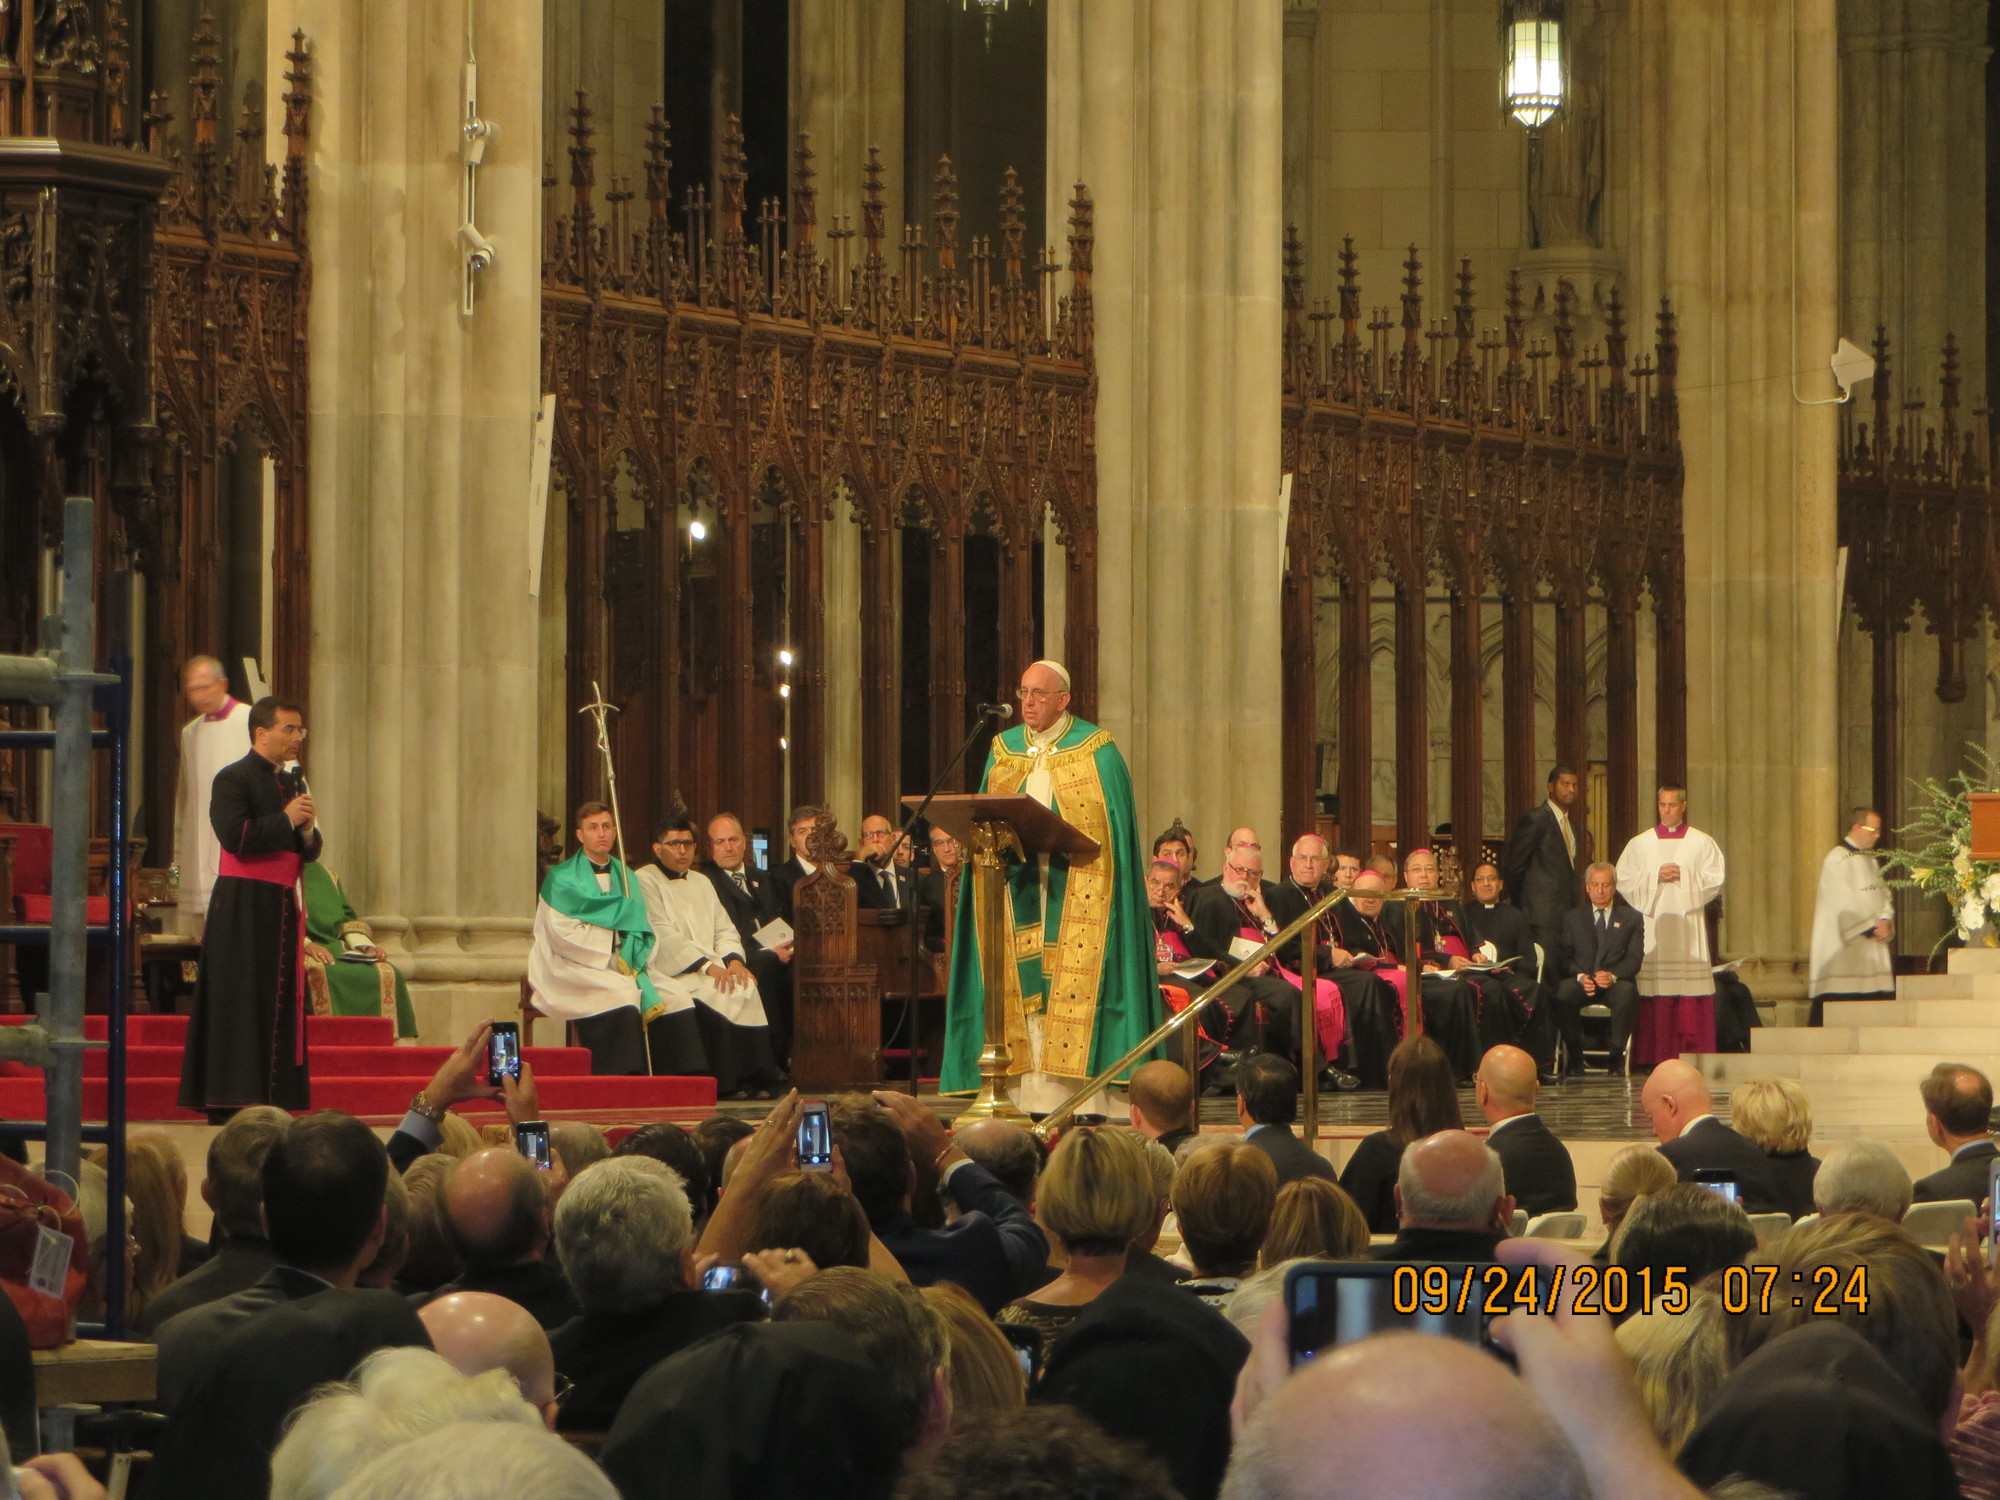 Pope Francis spoke at St. Patrick’s Cathedral on Sept. 24. (Courtesy Jo Ann Brennan)